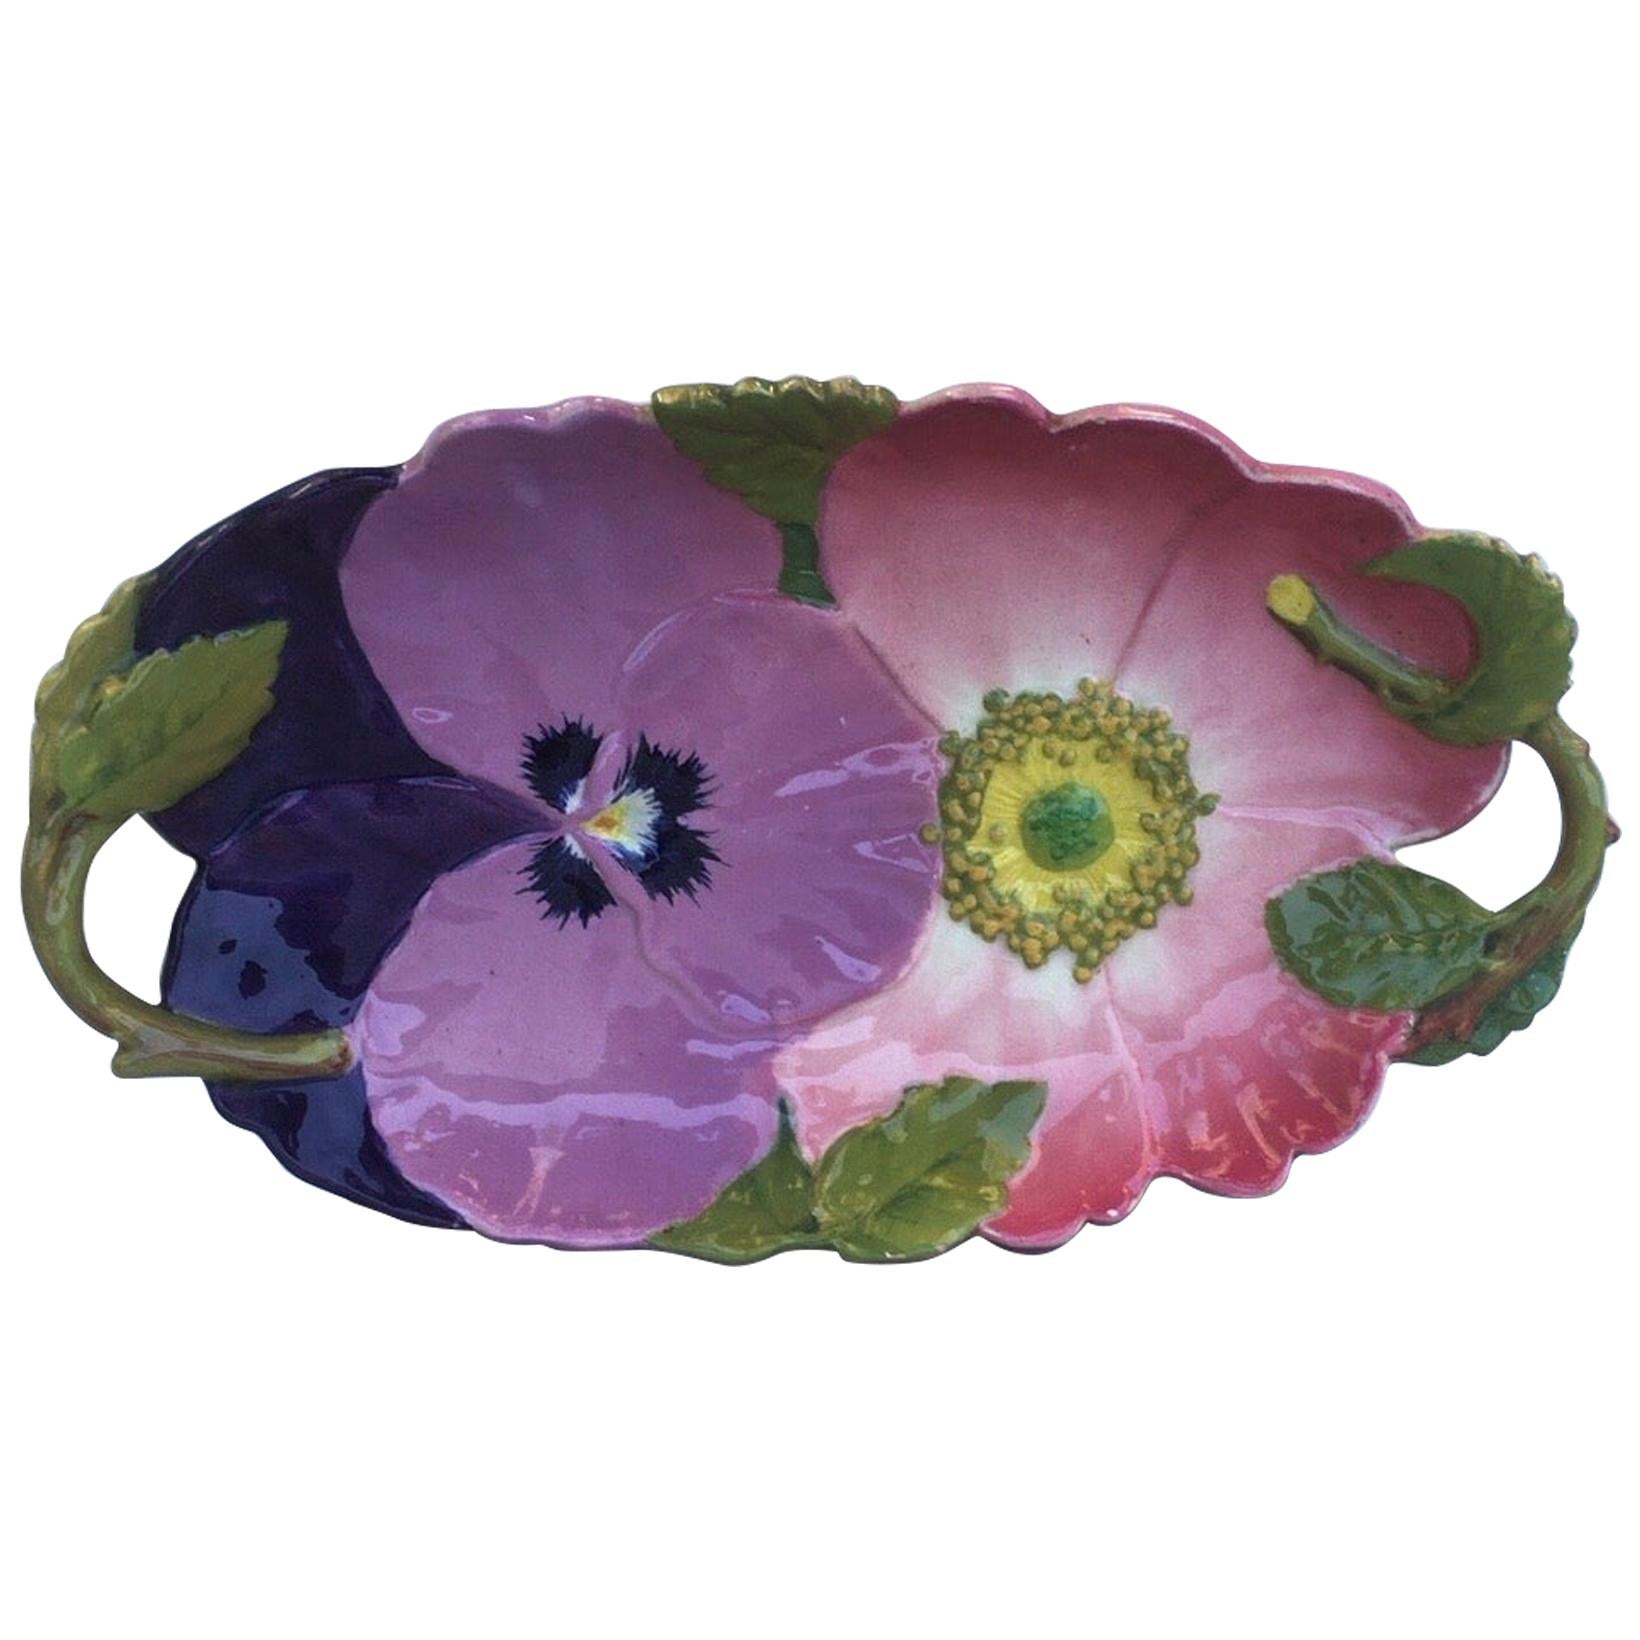 Charming Art Nouveau Majolica handled platter with a wild rose and a pansy attributed to Massier Circa 1890.
Measure: 17 inches length.